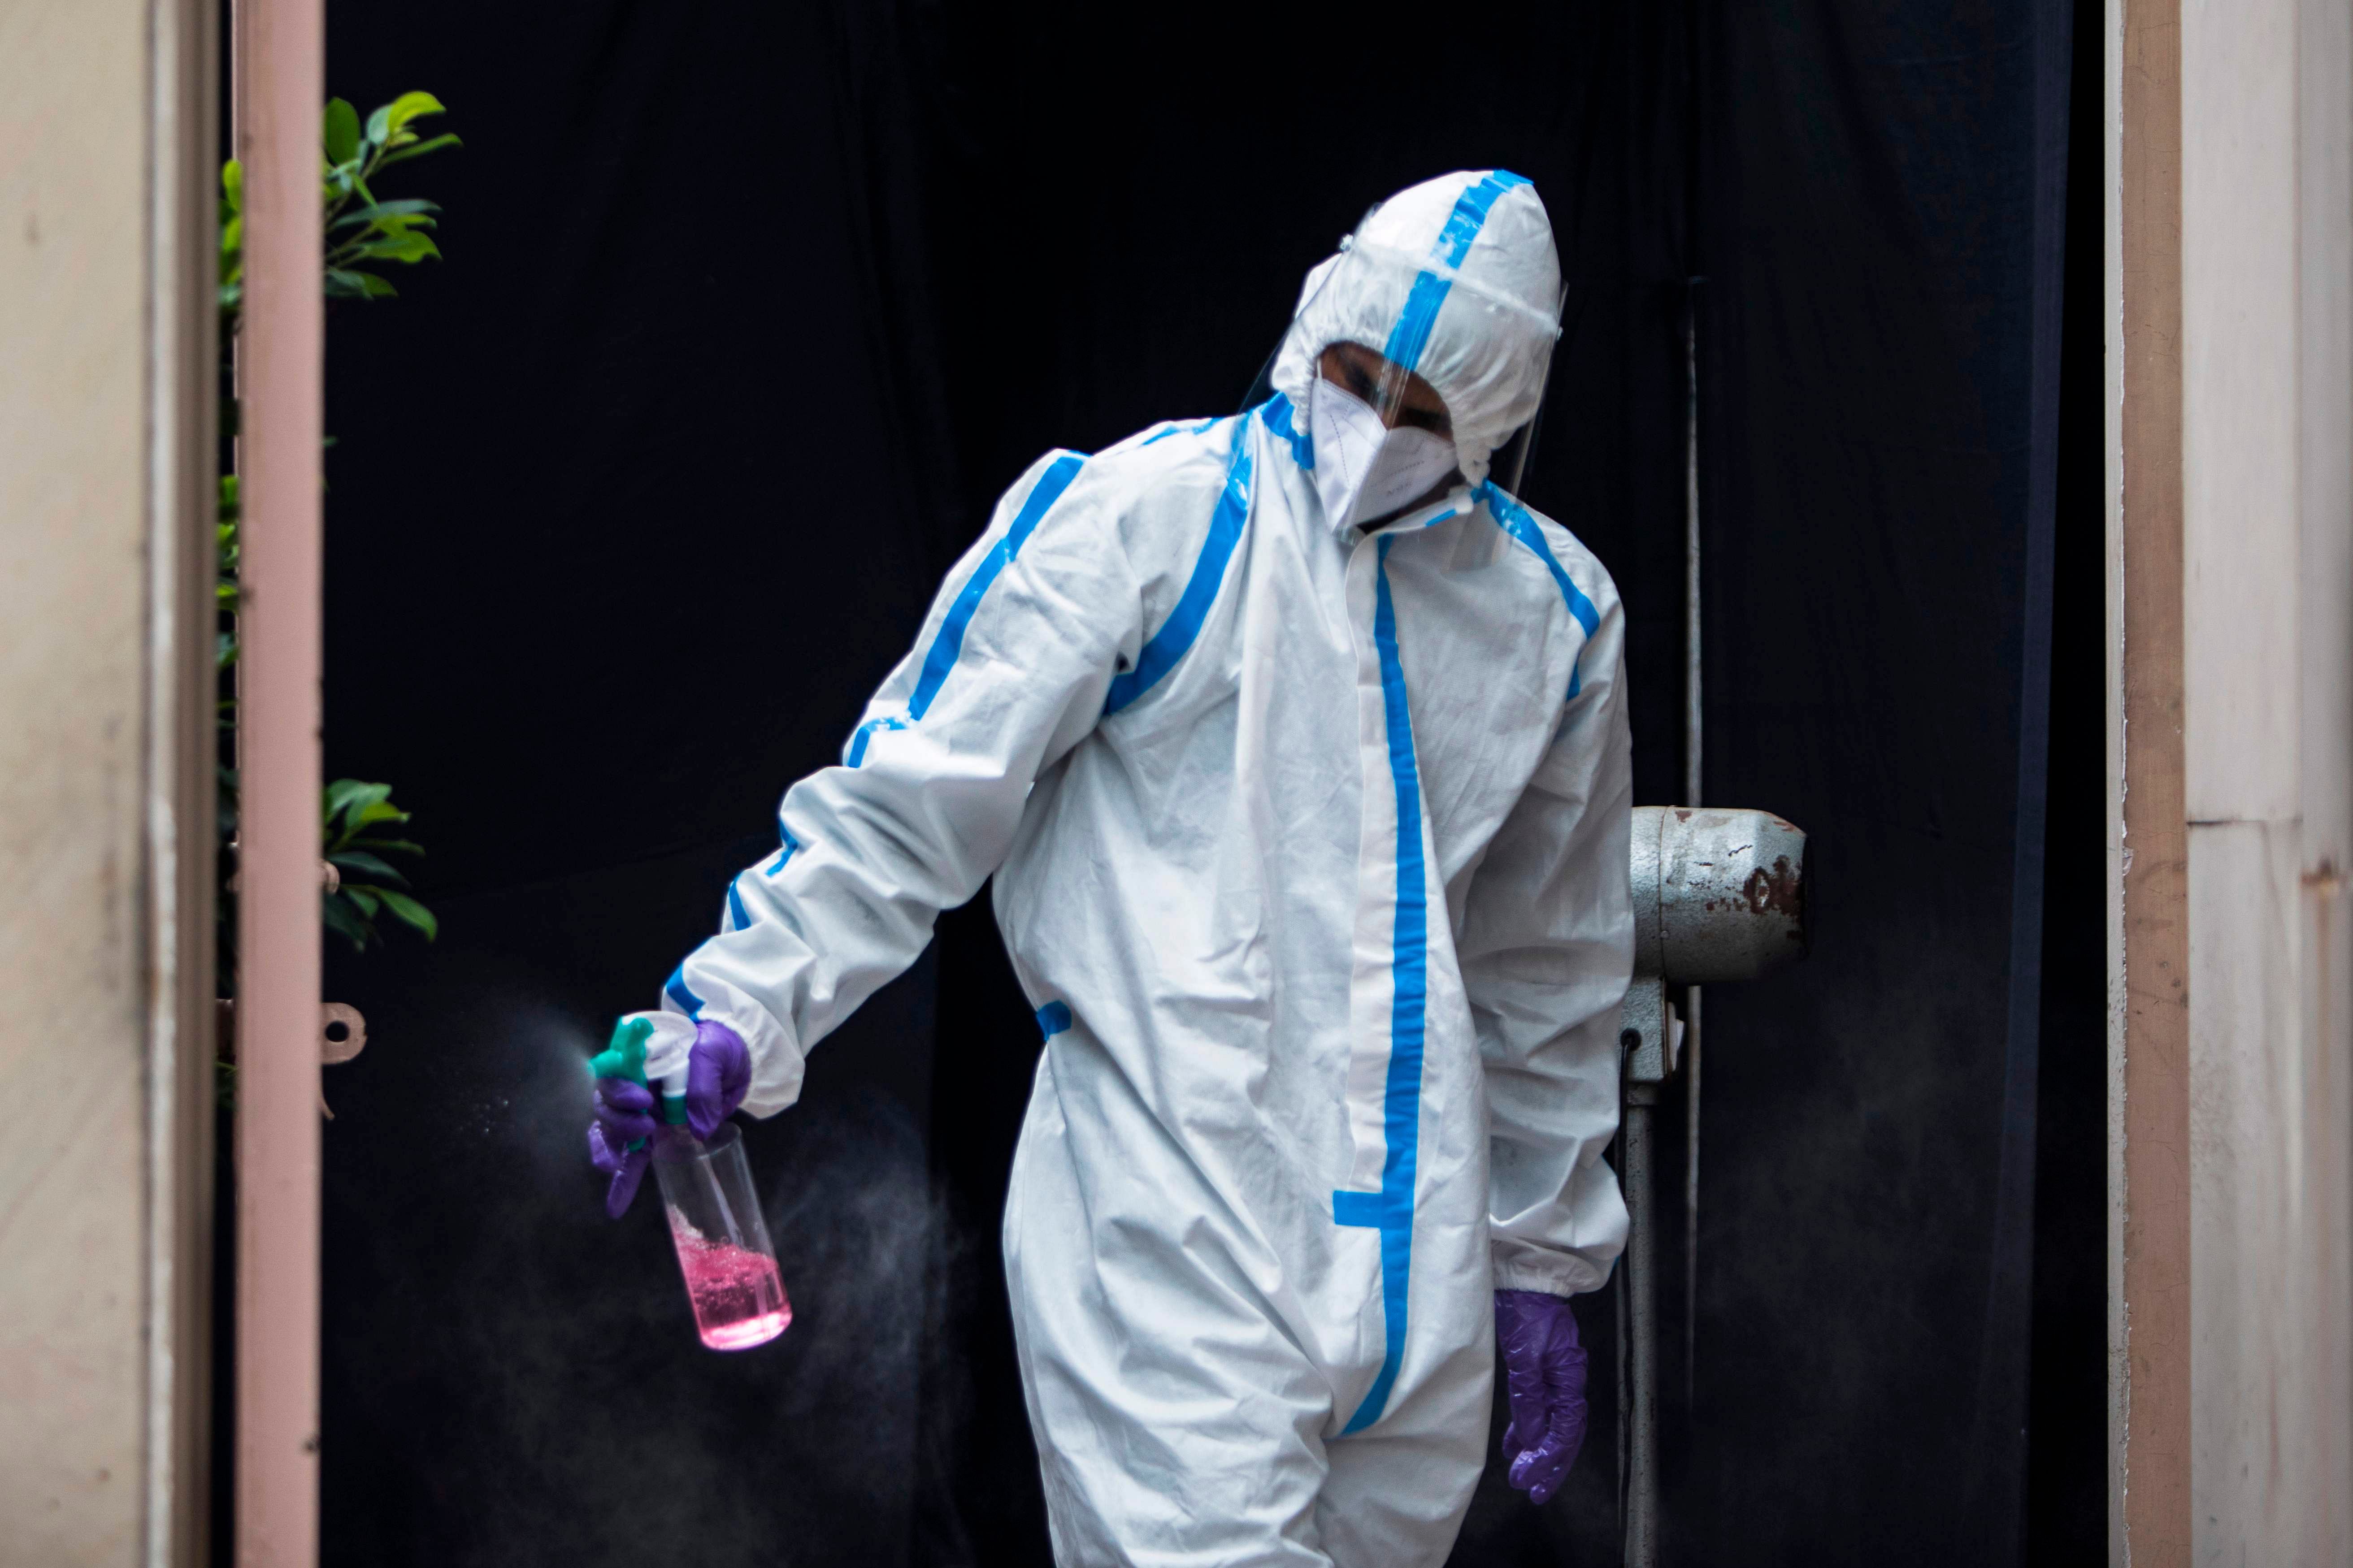 A health official wearing a Personal Protective Equipment (PPE) suit sprays disinfectant at the entrance of a temporary testing facility in Delhi. Credit: AFP